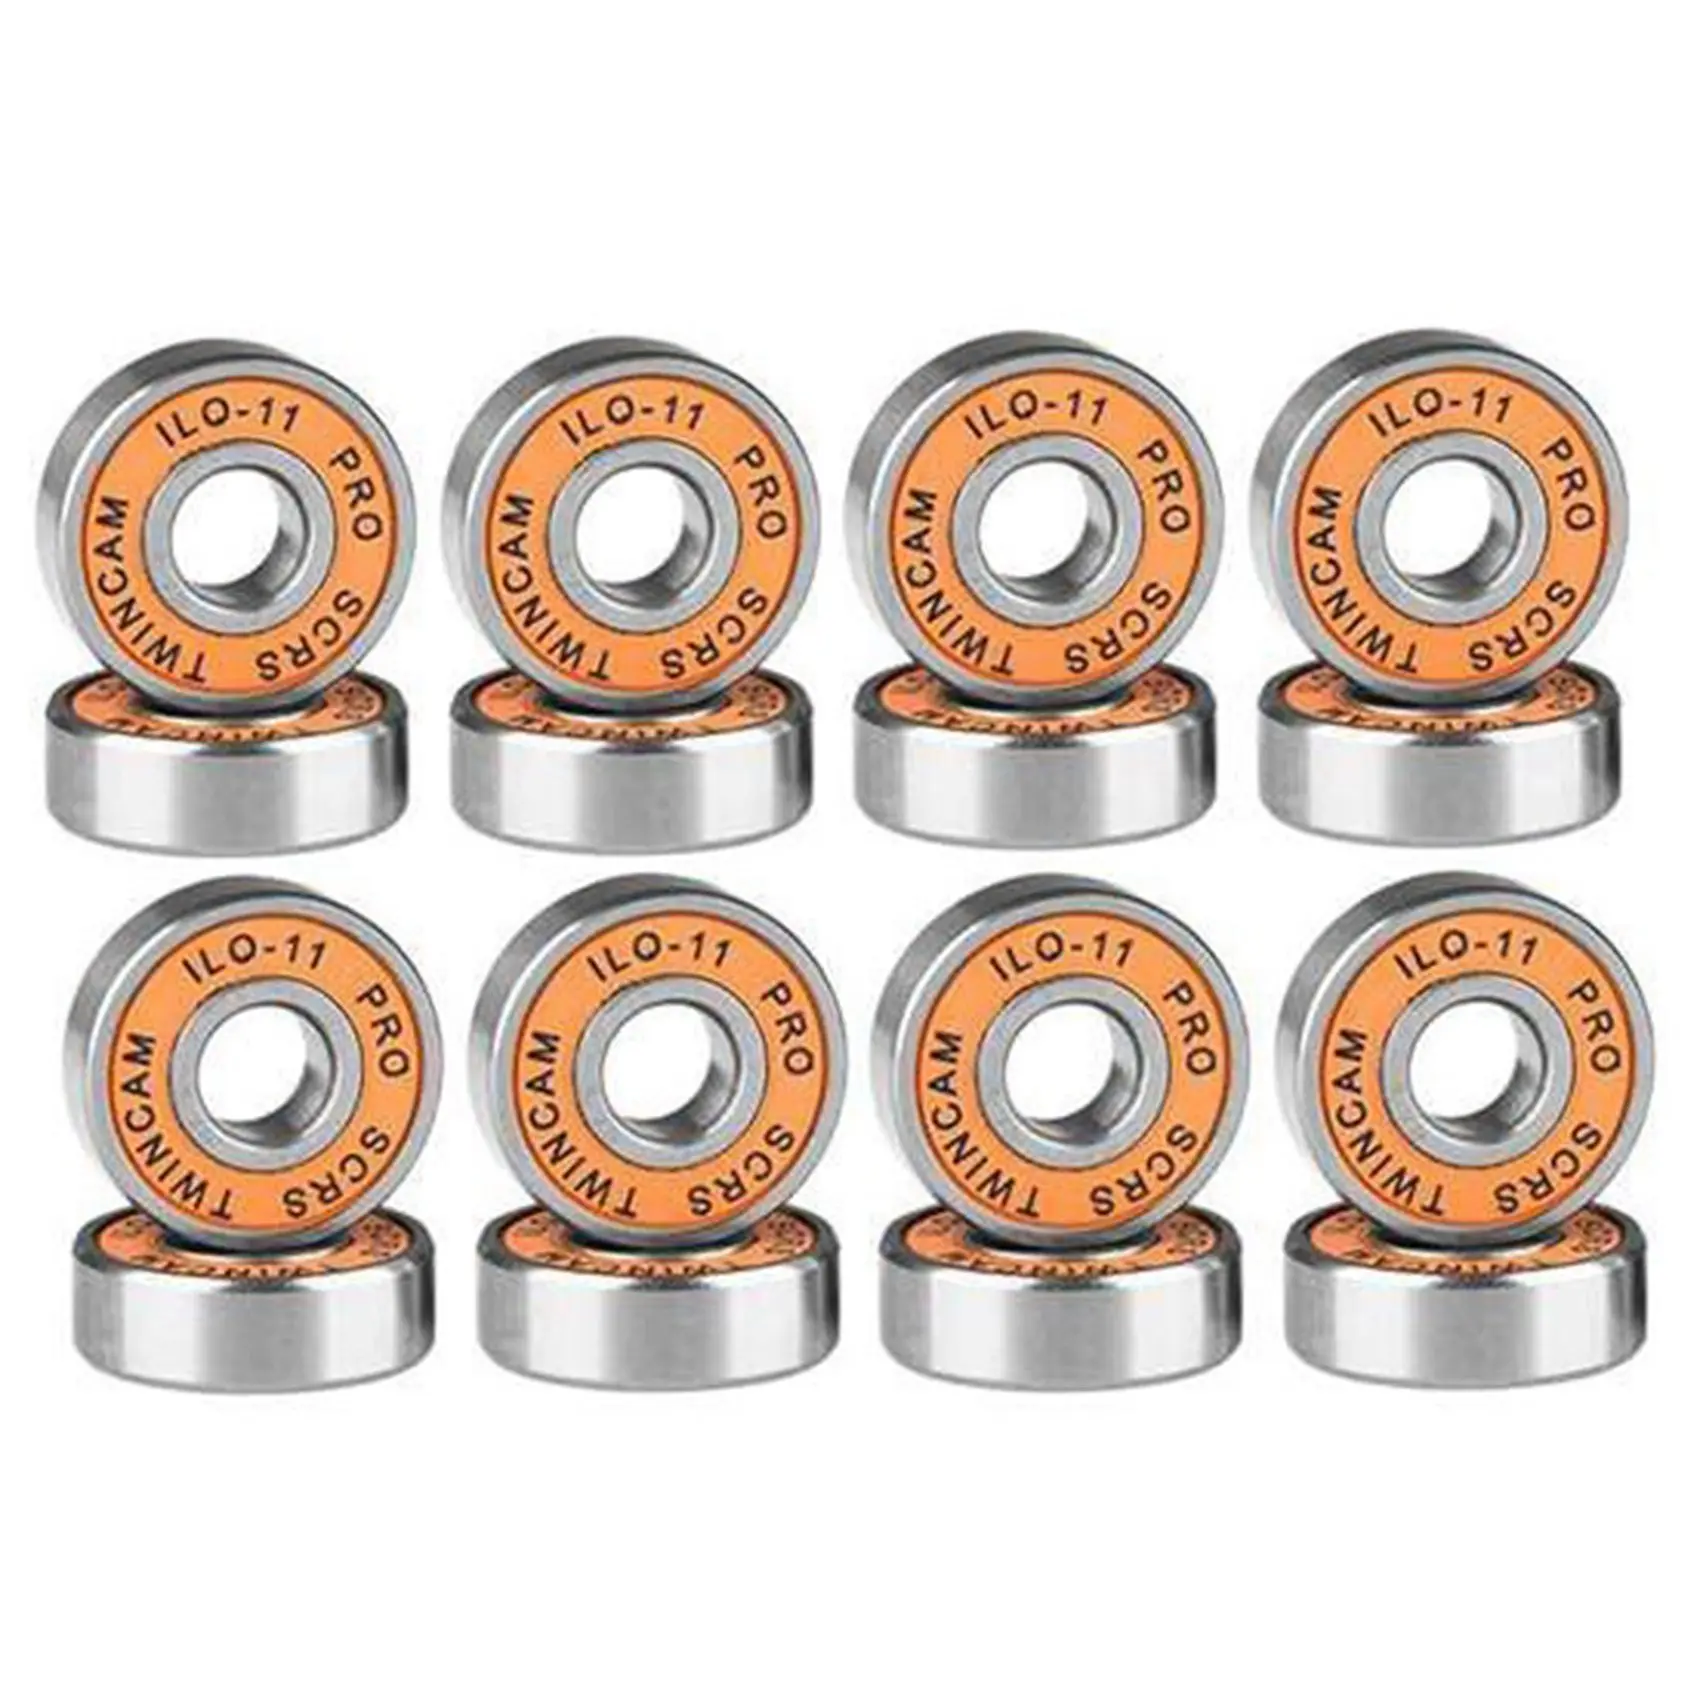 

New 16Pcs ILQ-11 Skate Scooter No Noise Oil Lubricated Smooth Skate Bearing Longboard Speed Inline Skate Wheel Bearing